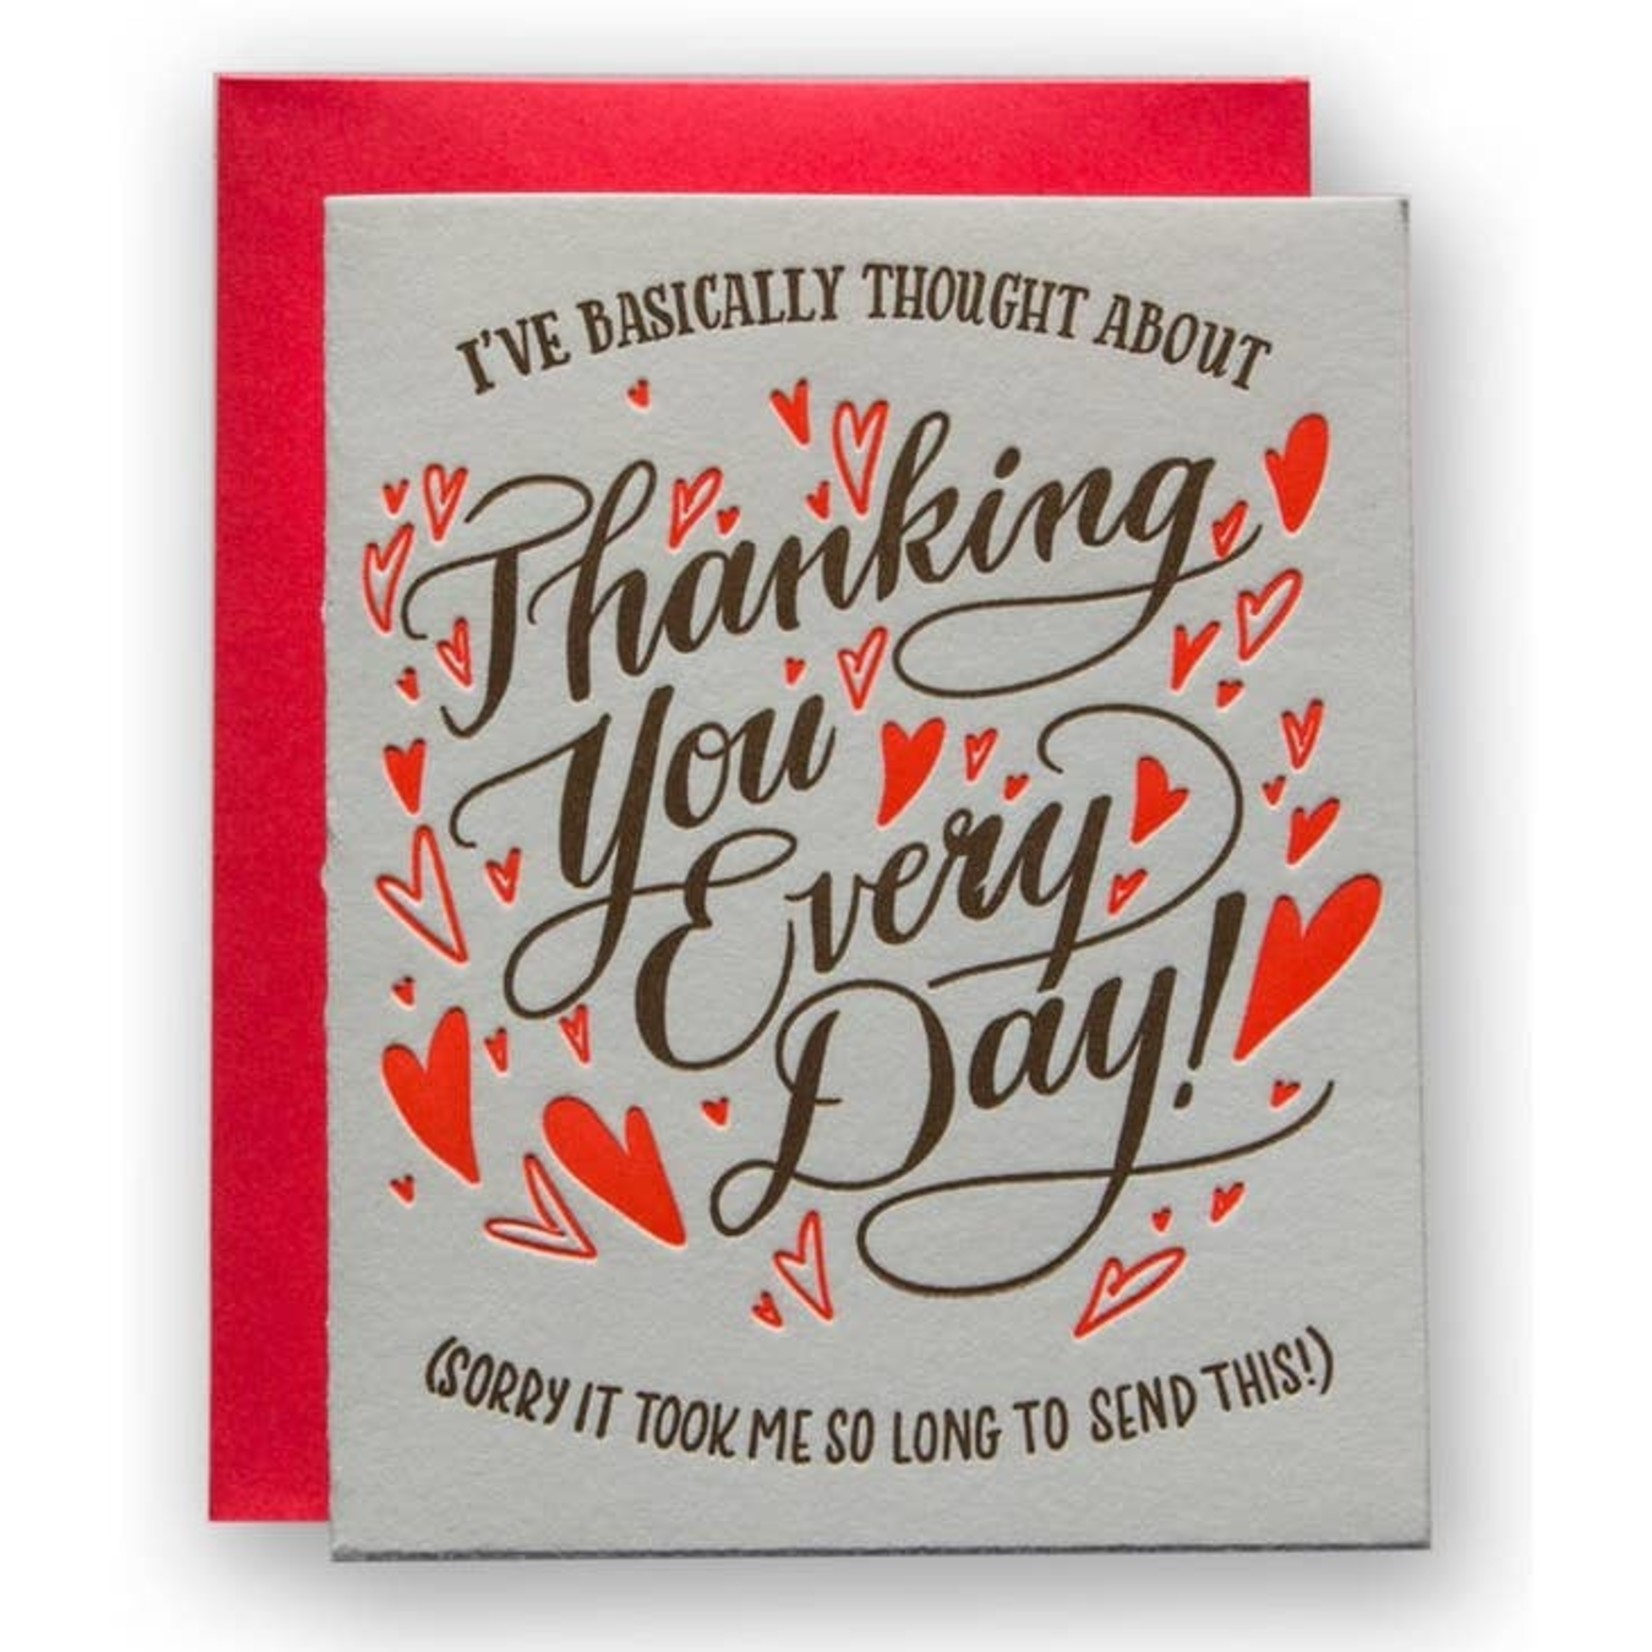 Greeting Cards - Thank You Thanking You Every Day